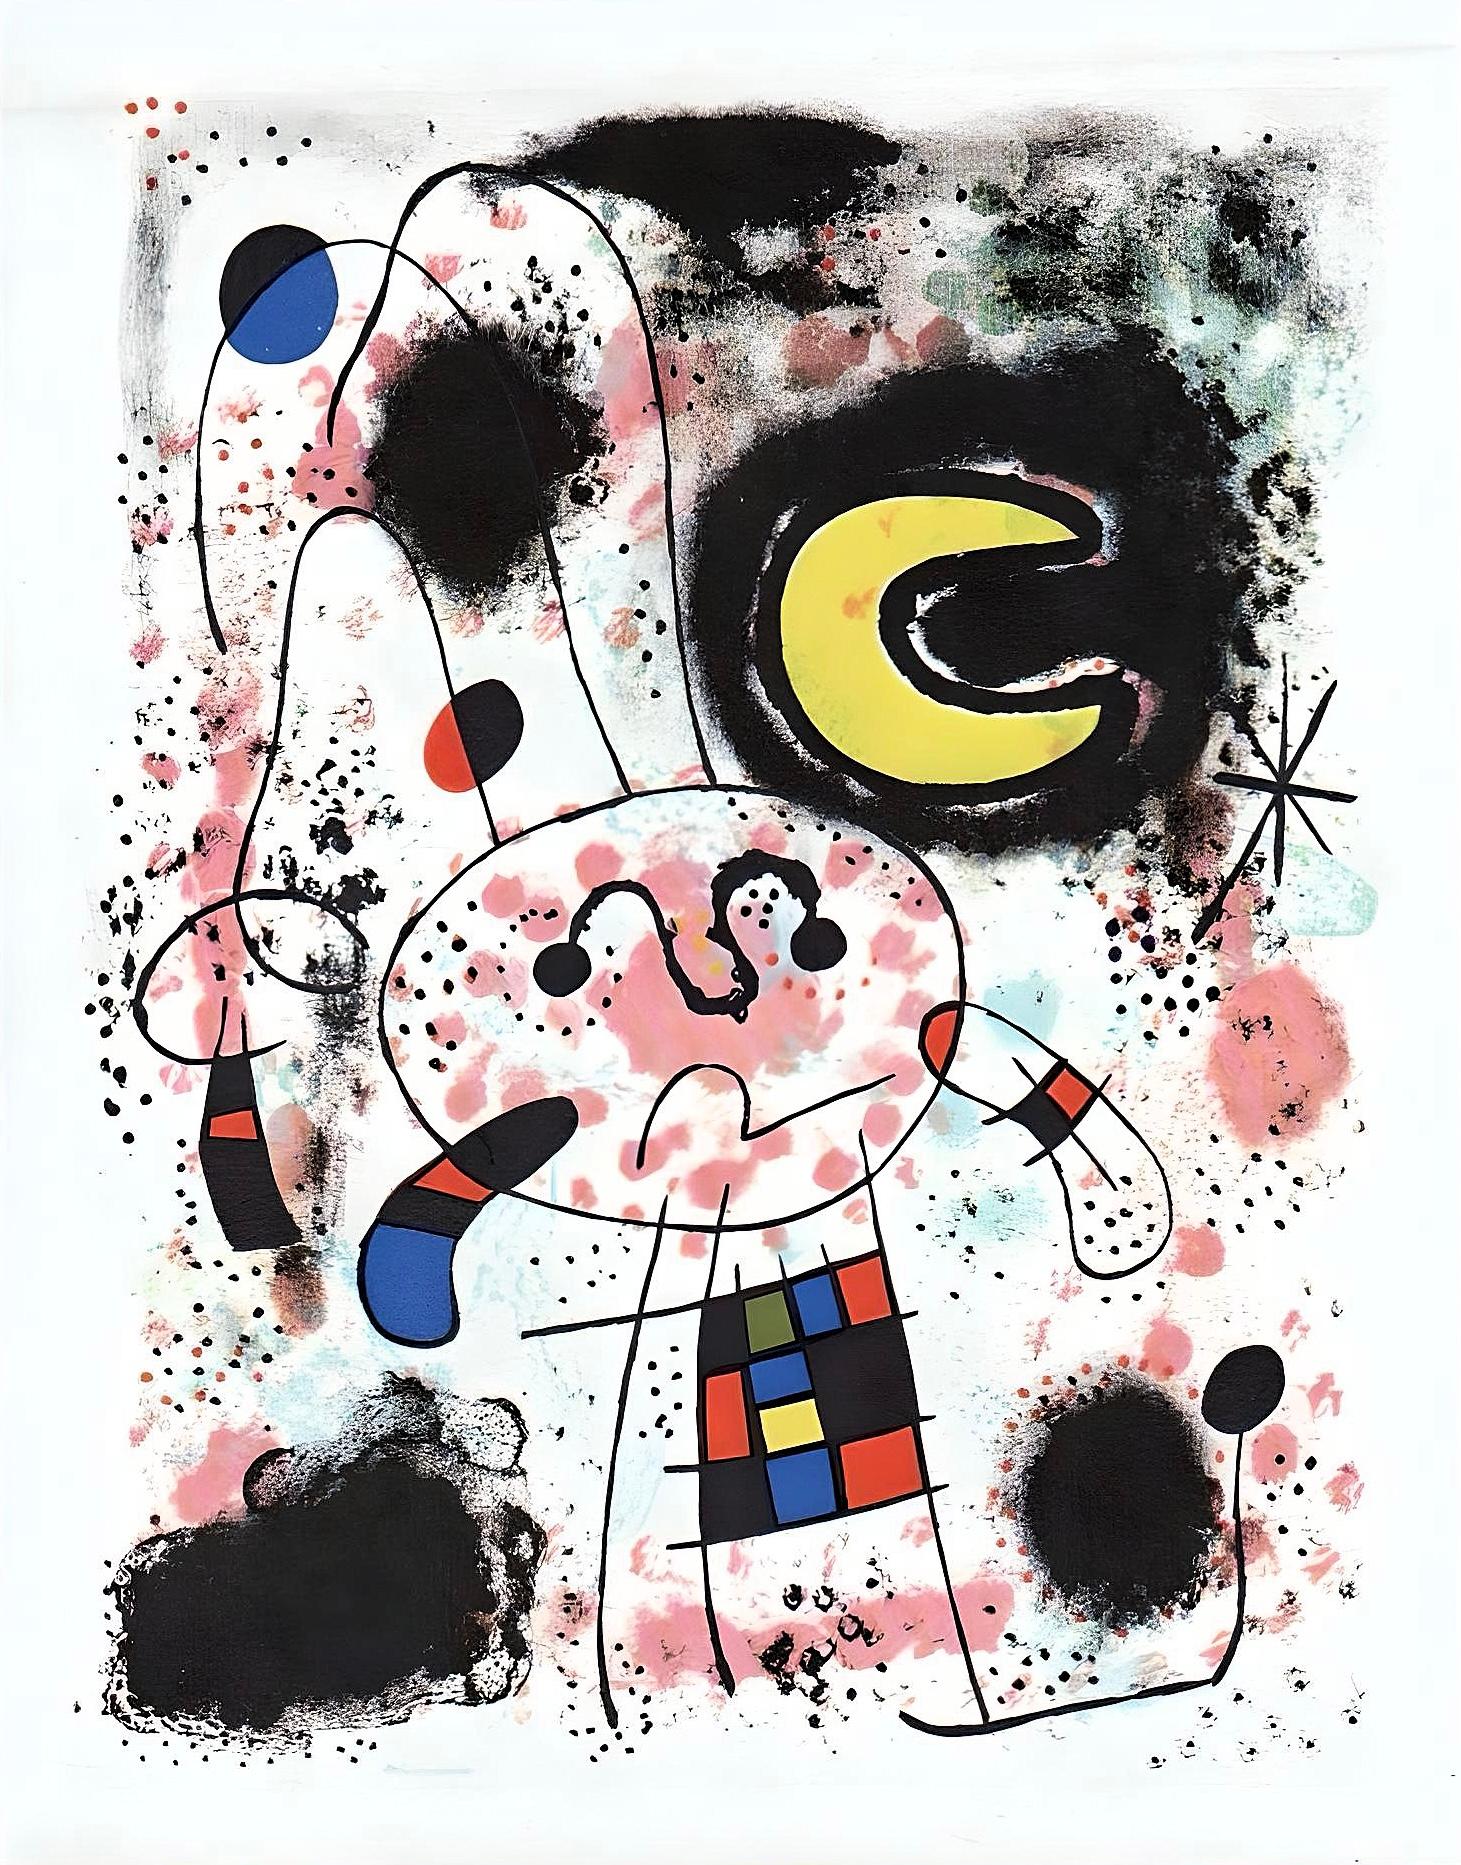 Joan Miró Abstract Print - Miro, Composition (Mourlot 209) (after)